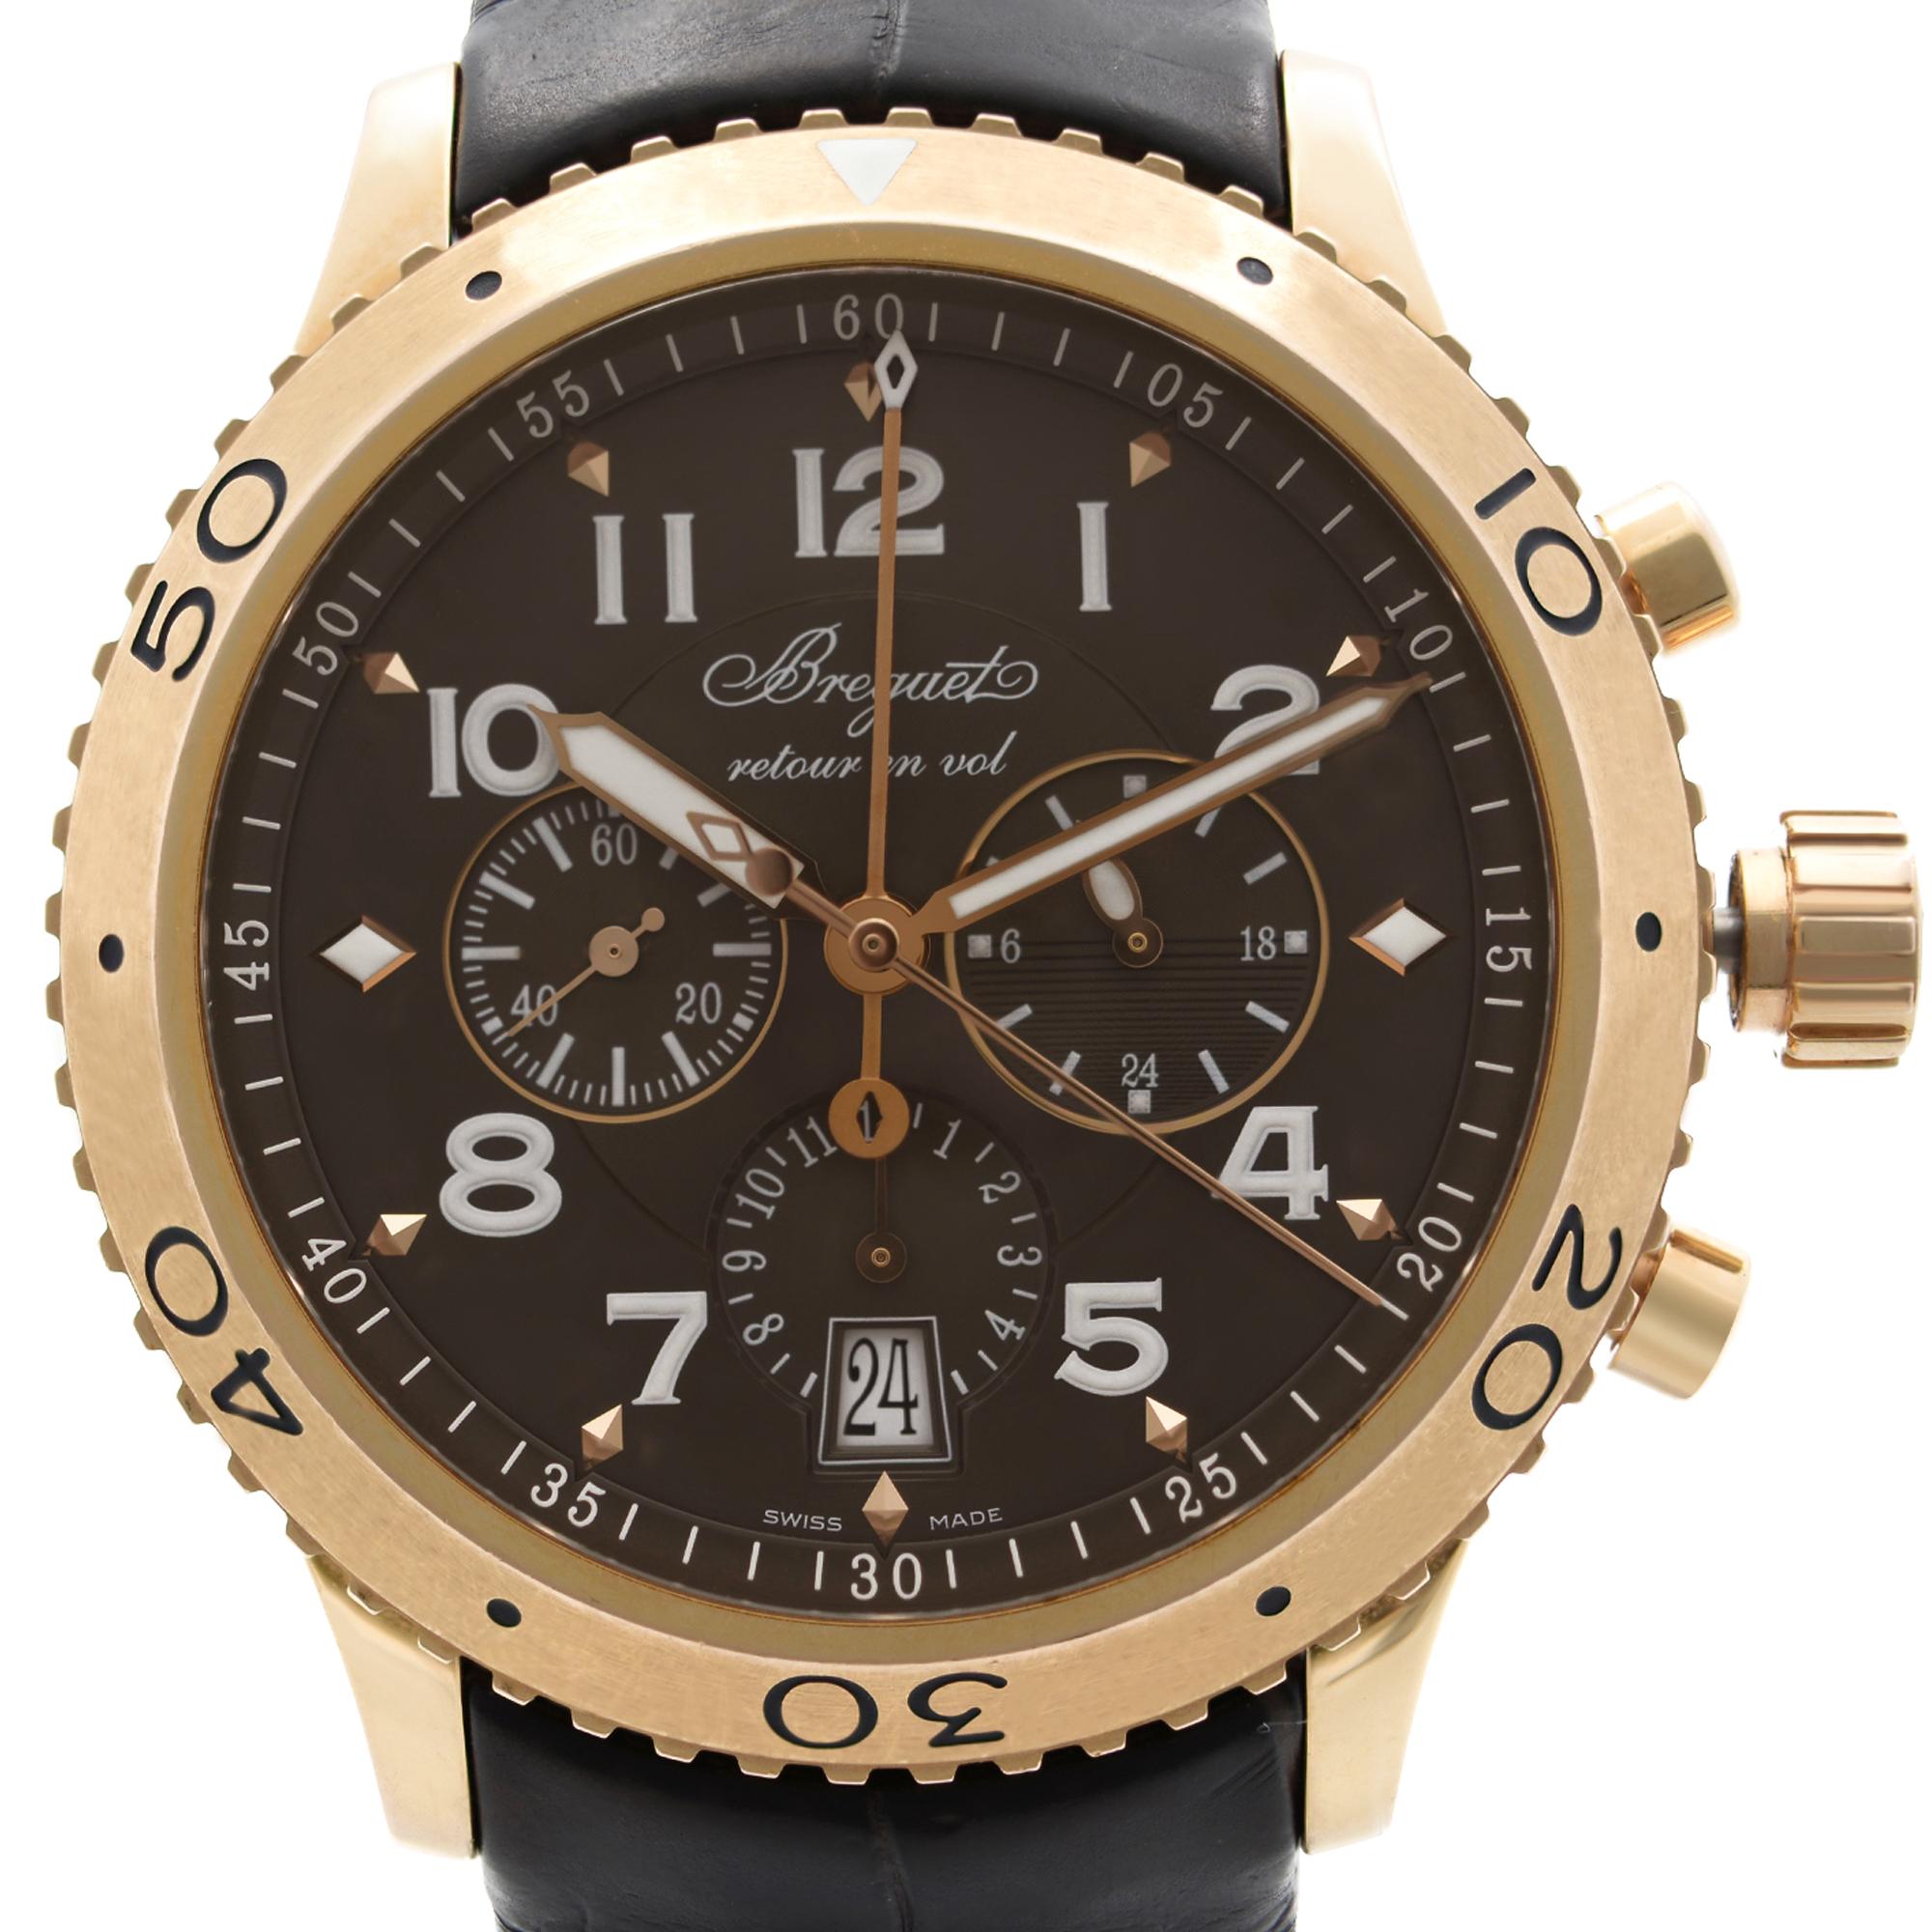 Pre Owned Breguet Marine Transatlantique Type XXI Flyback18k Rose Gold Ruthenium Dial Men's Watch 3810BR/92/9ZU. This Beautiful Timepiece is Powered by Mechanical (Automatic) Movement And Features: Round 18k Rose Gold Case with a Brown Leather